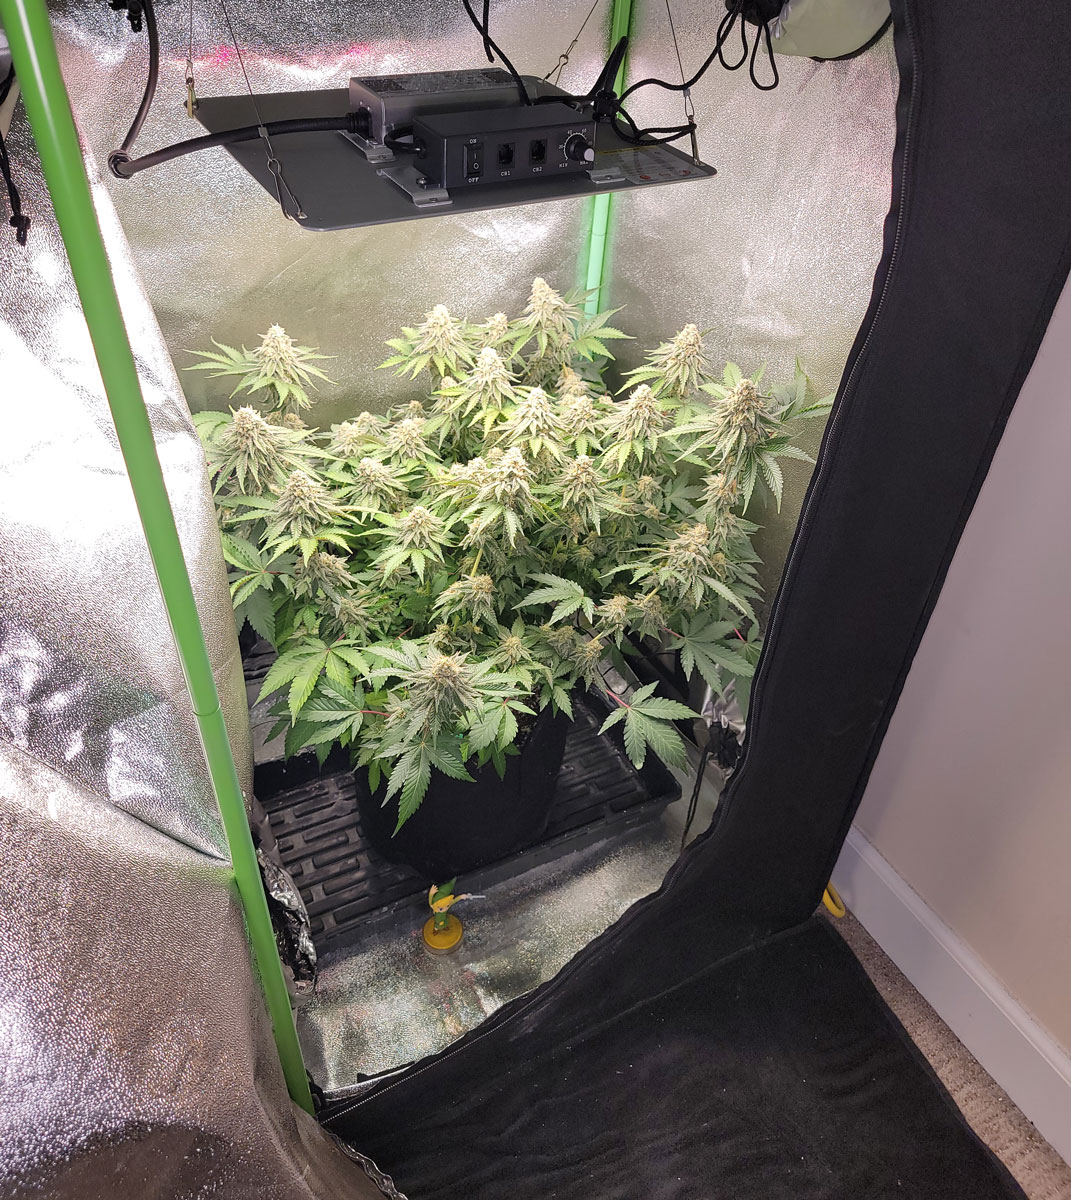 Harvest up 4 oz in this 100W Mini Grow Kit – Complete Setup & Weed Growing Tutorial | Grow Weed Easy